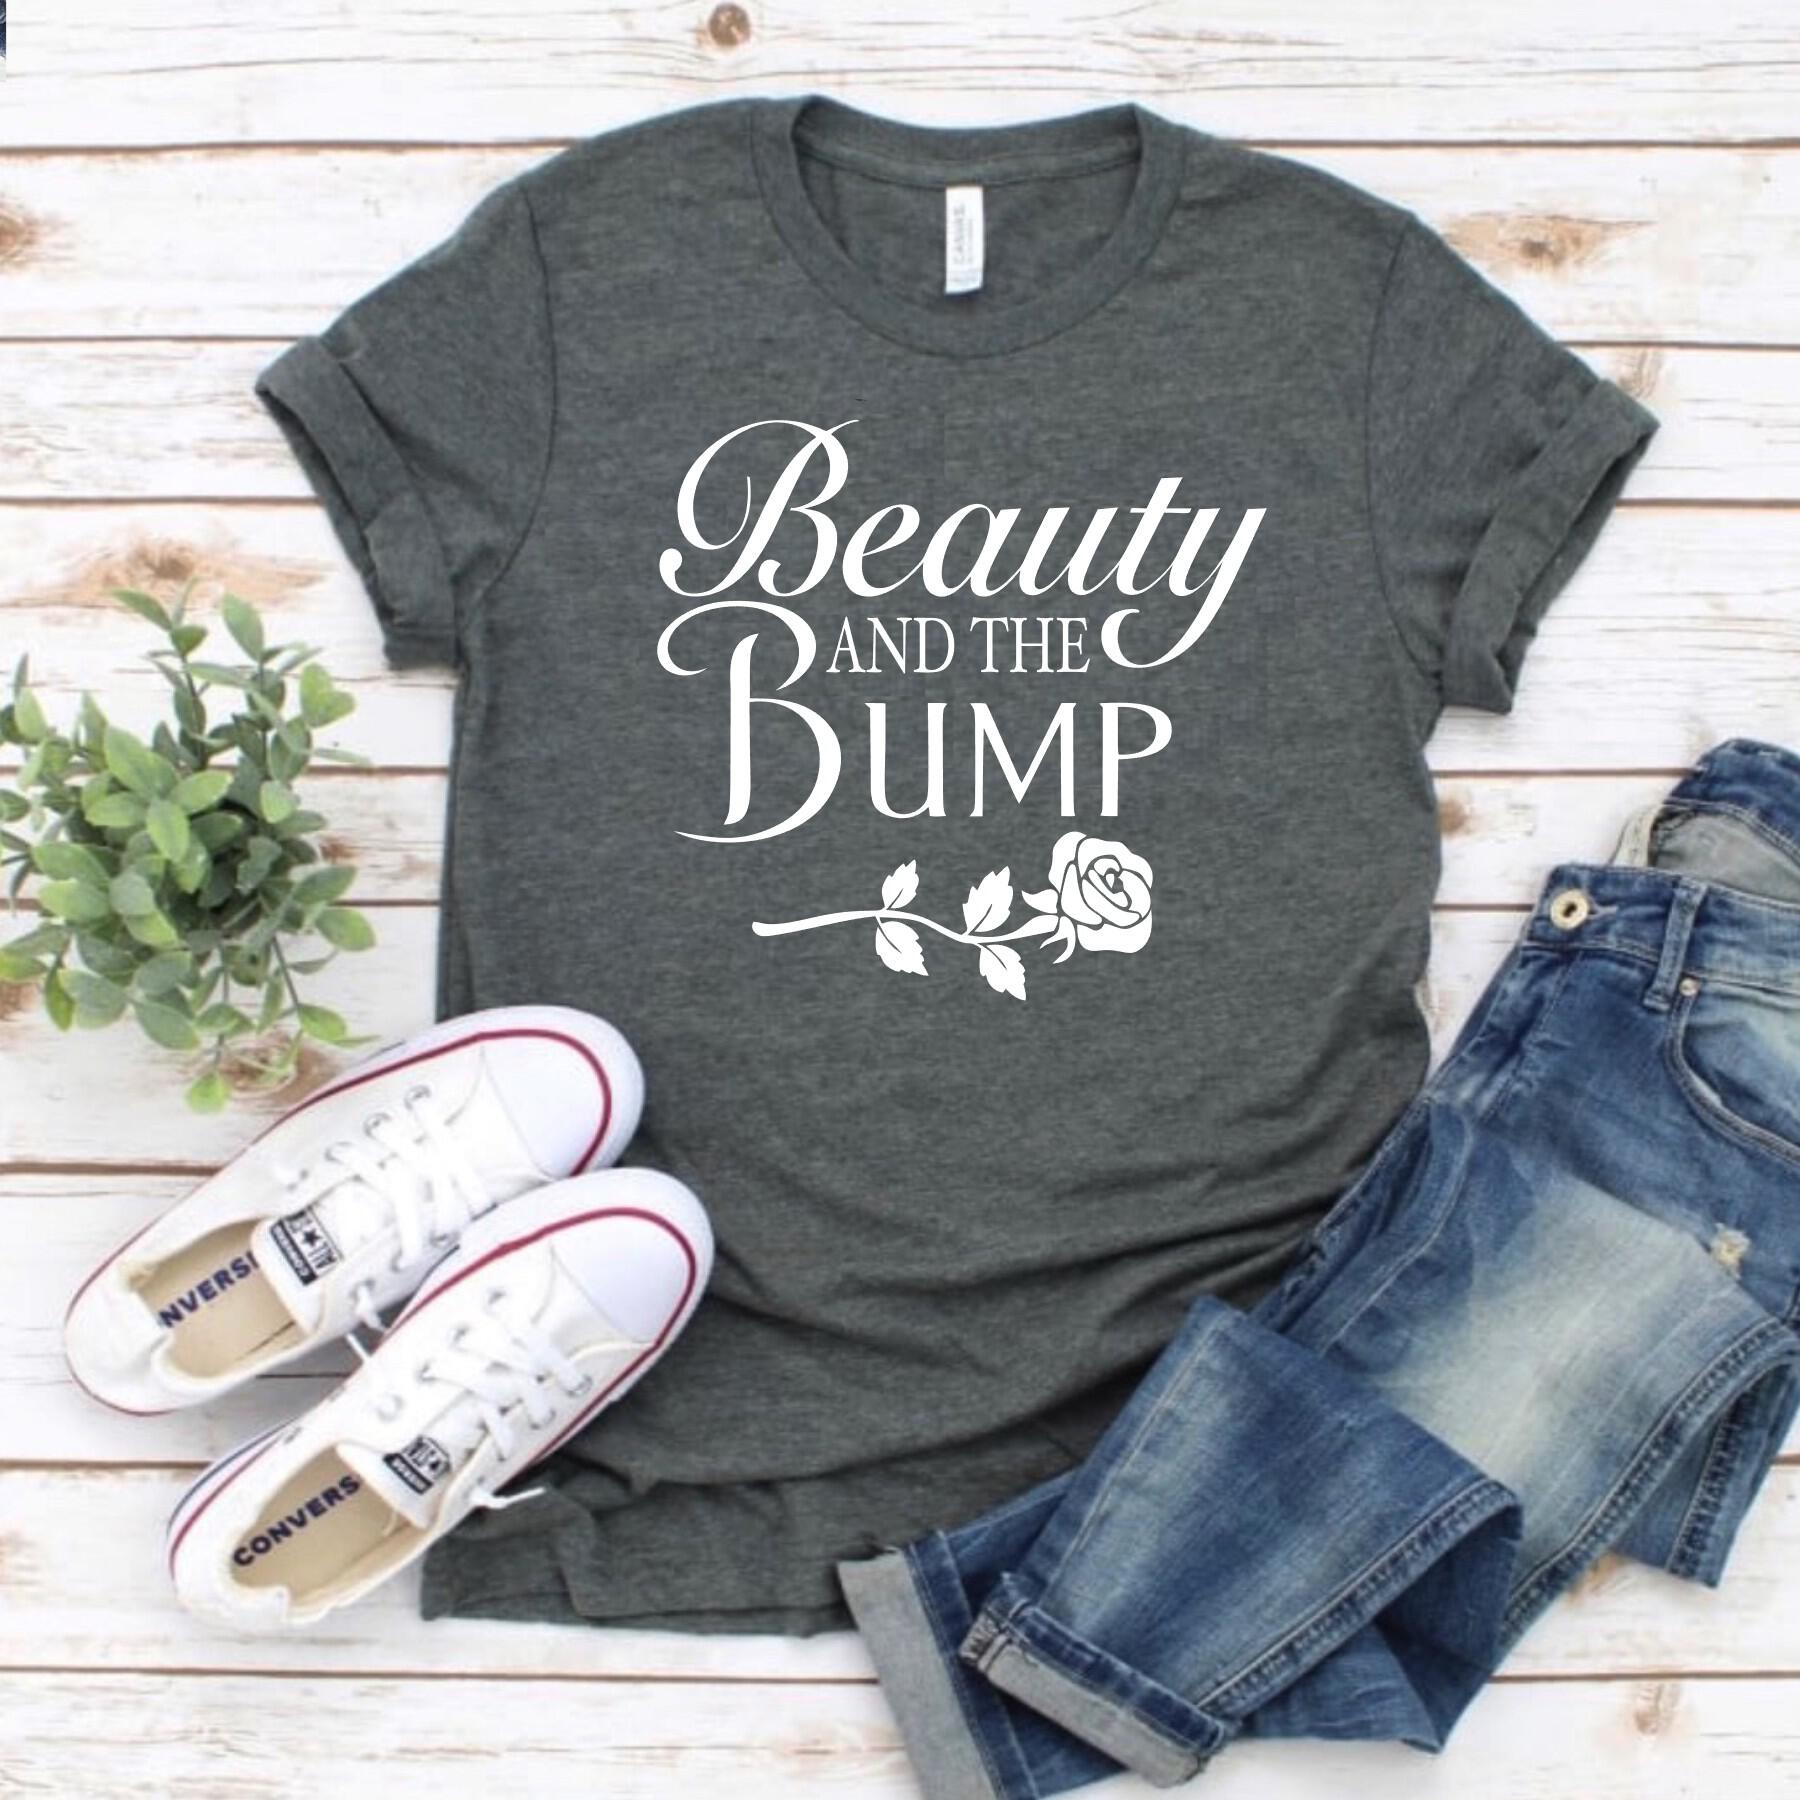 personalized maternity shirt, our little princess crown belly